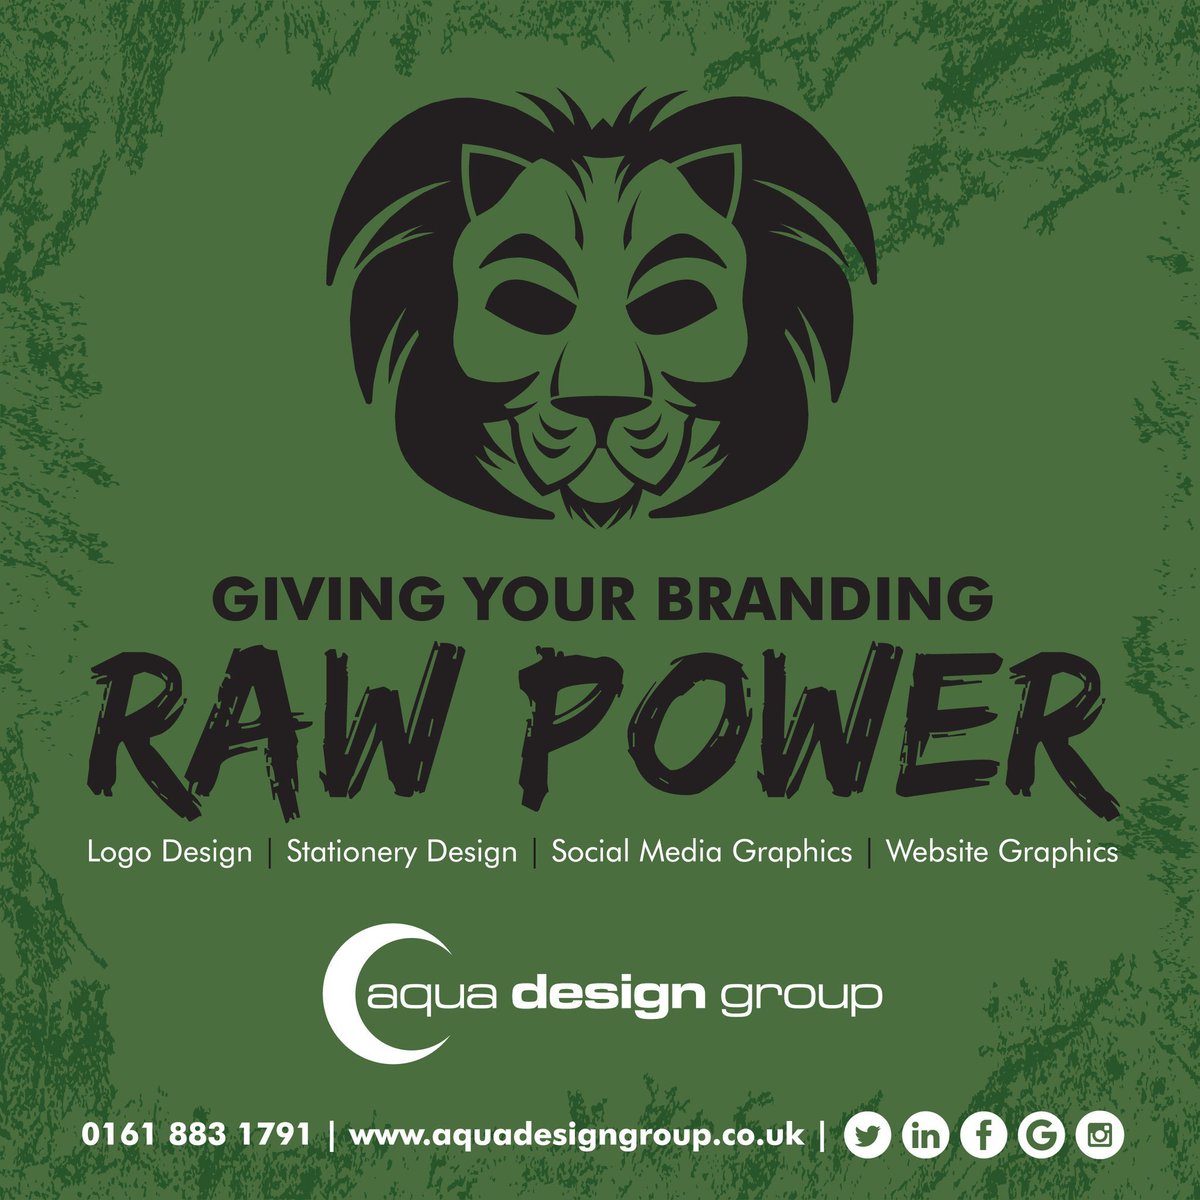 Give your #smallbusiness branding raw power. Come and have a chat about #logodesign and more 😊 #Startup #Branding #ShopIndie #BizBubble #Stockport aquadesigngroup.co.uk